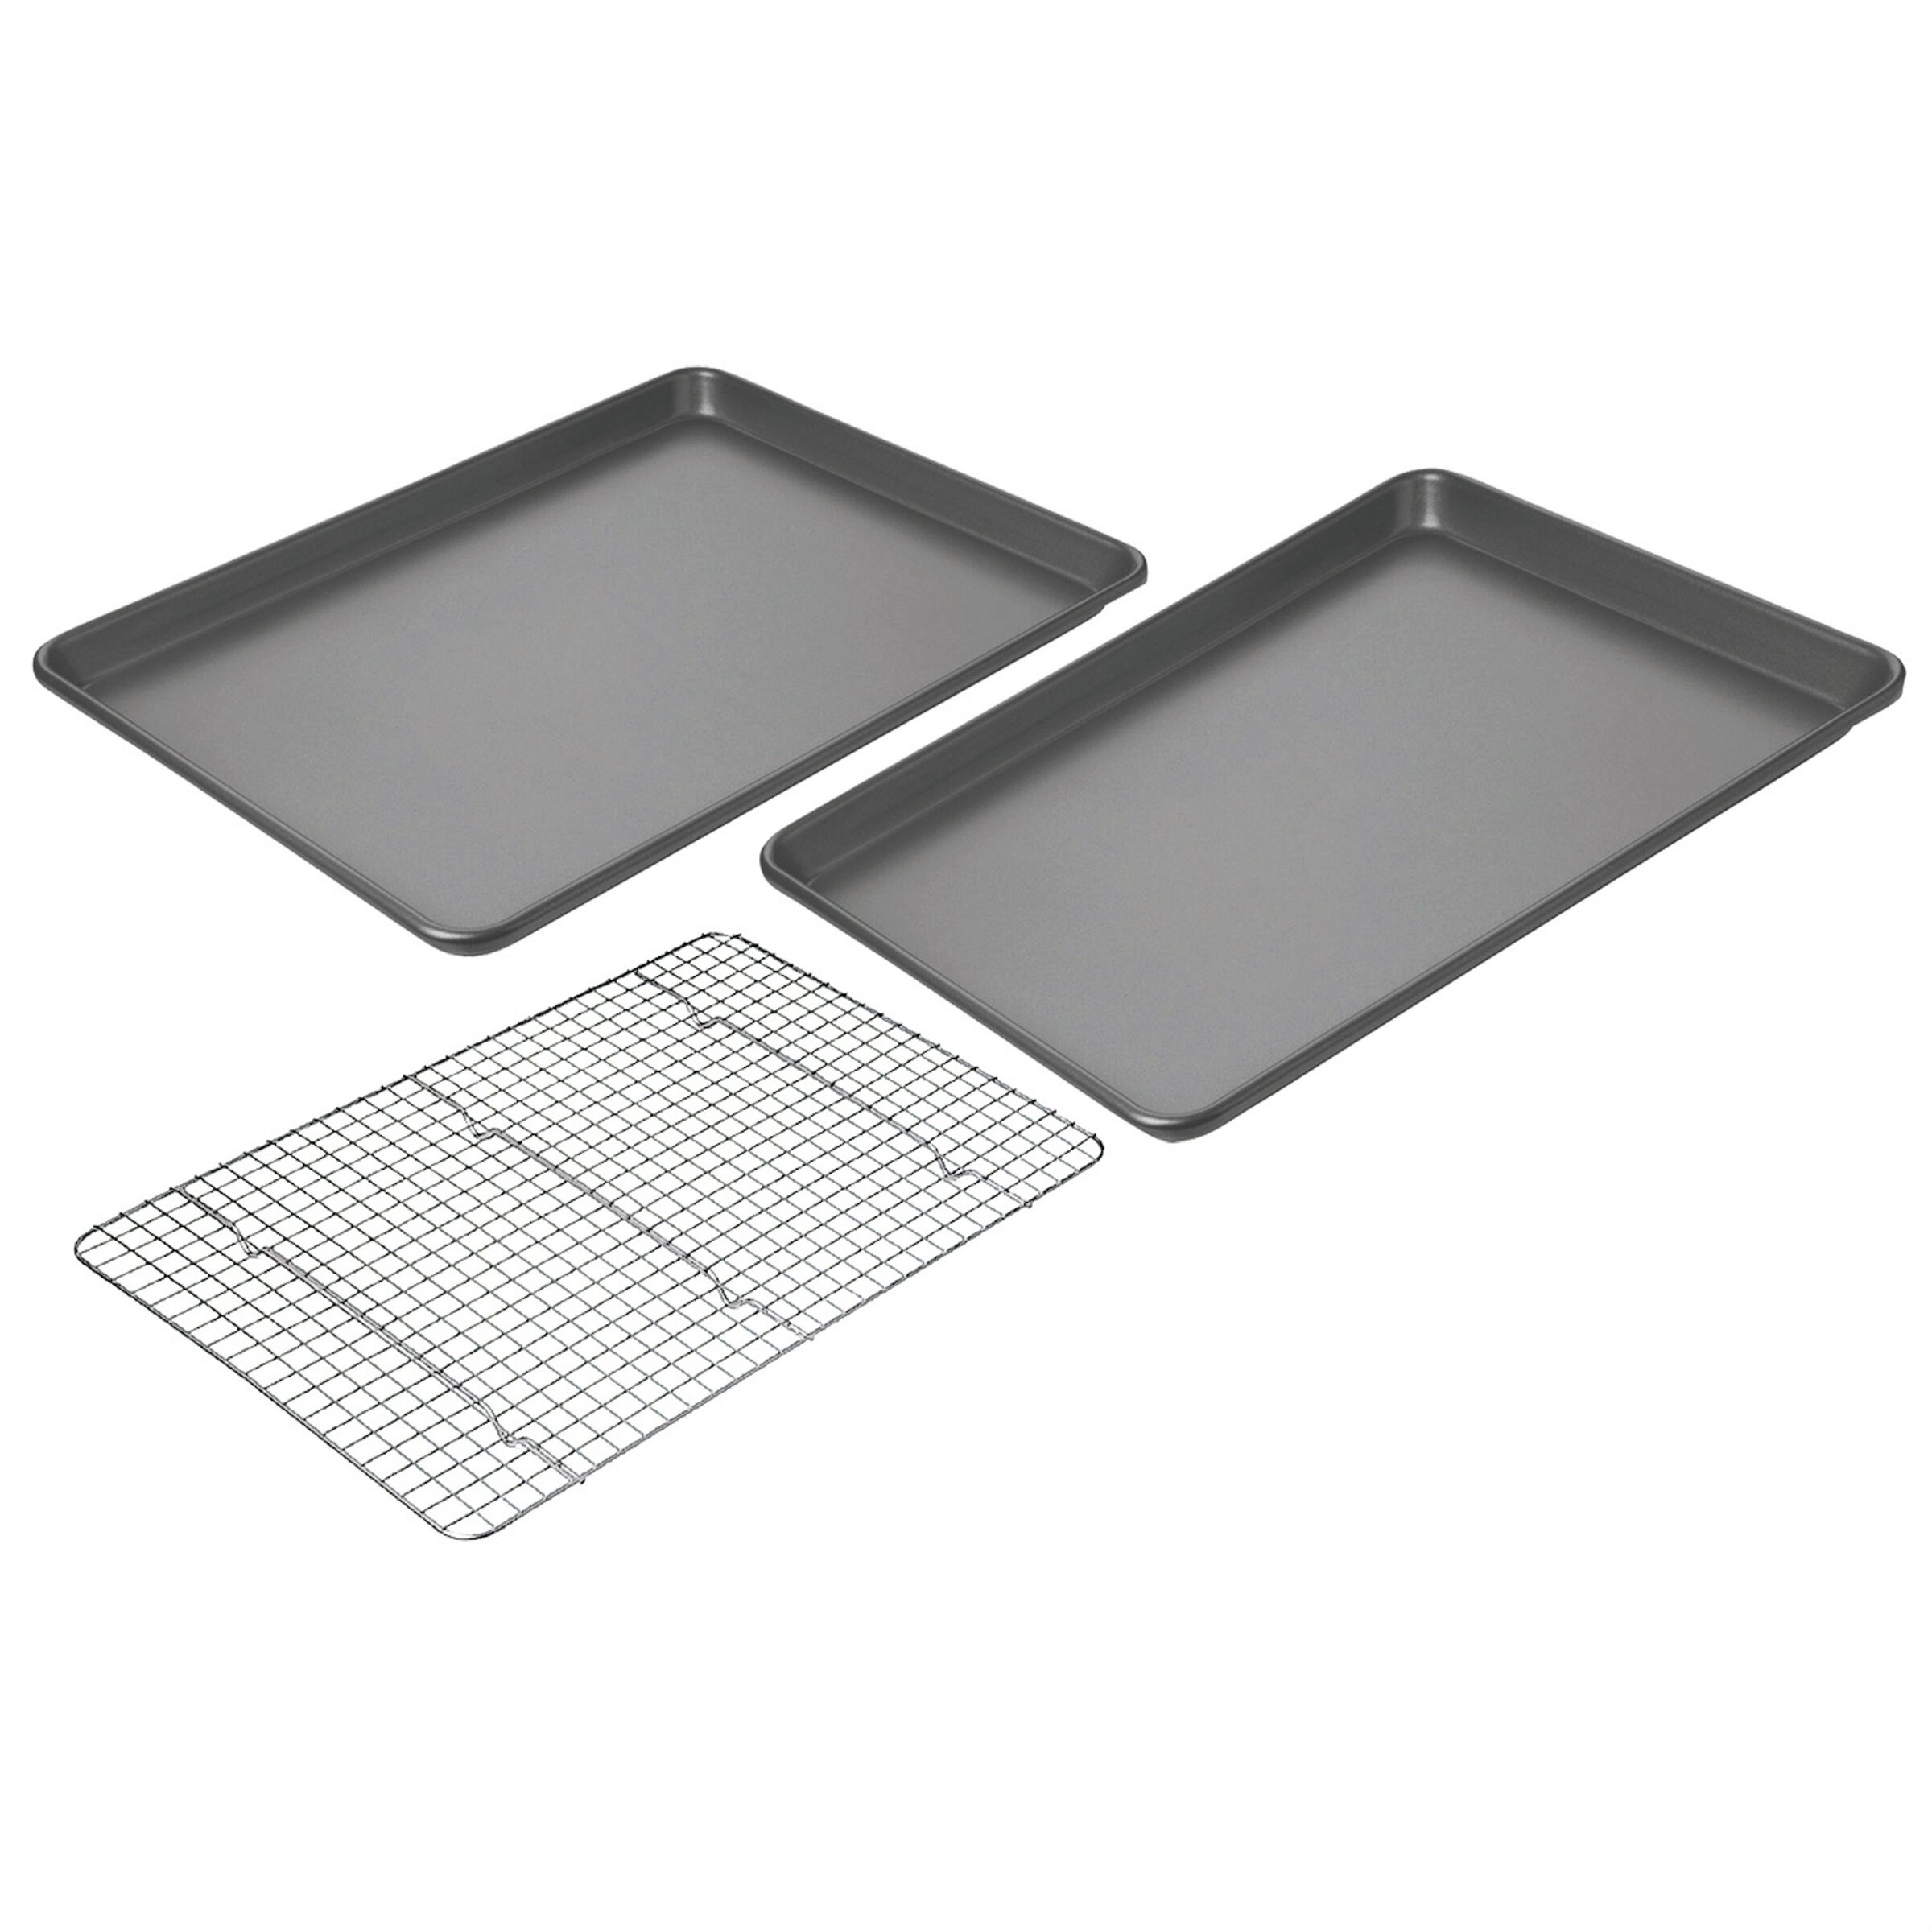 Chicago Metallic Professional Non-Stick Cooking/Baking Sheet, 14.75-Inch -by-9.75-Inch  Reviews Wayfair